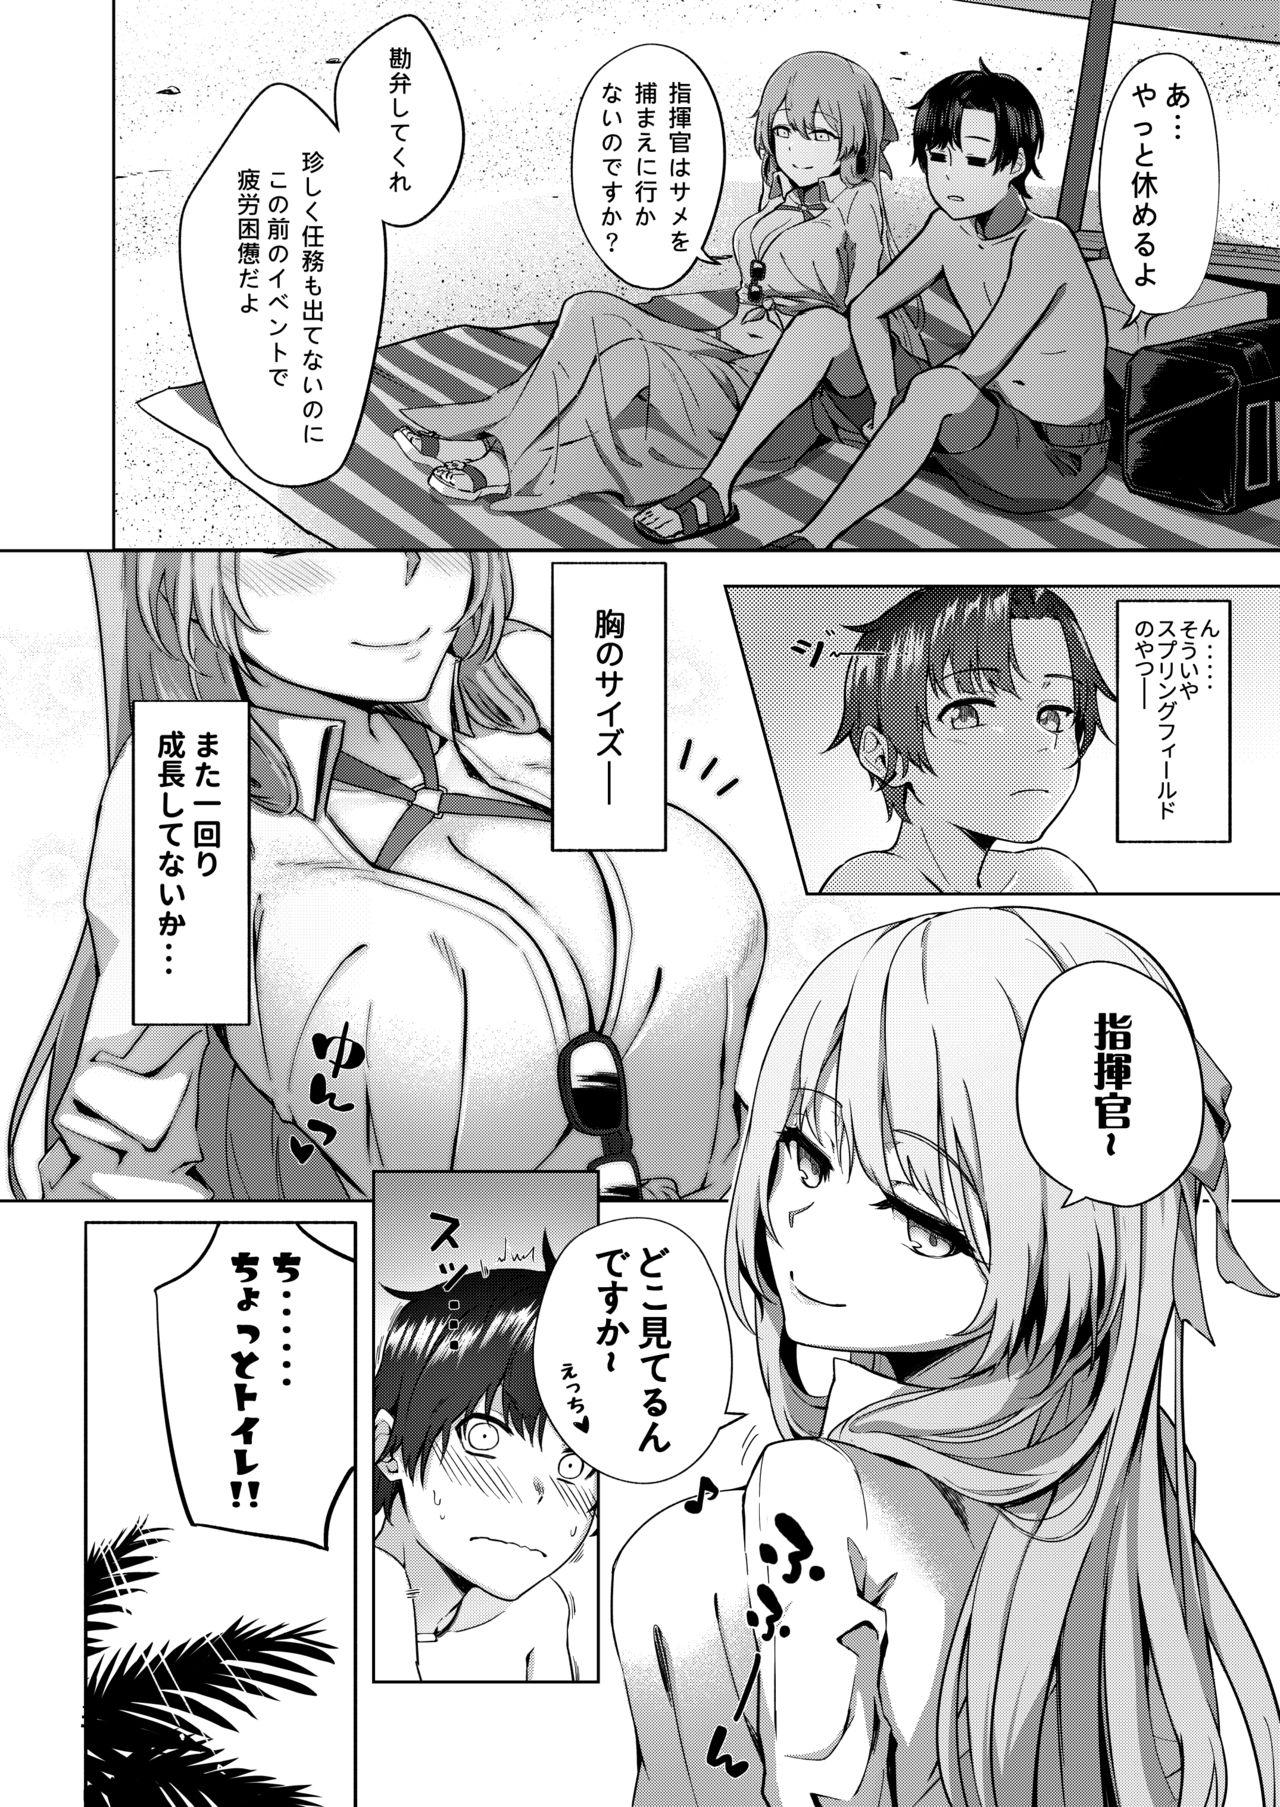 Step Mom Field on Fire - Girls frontline Blows - Page 4